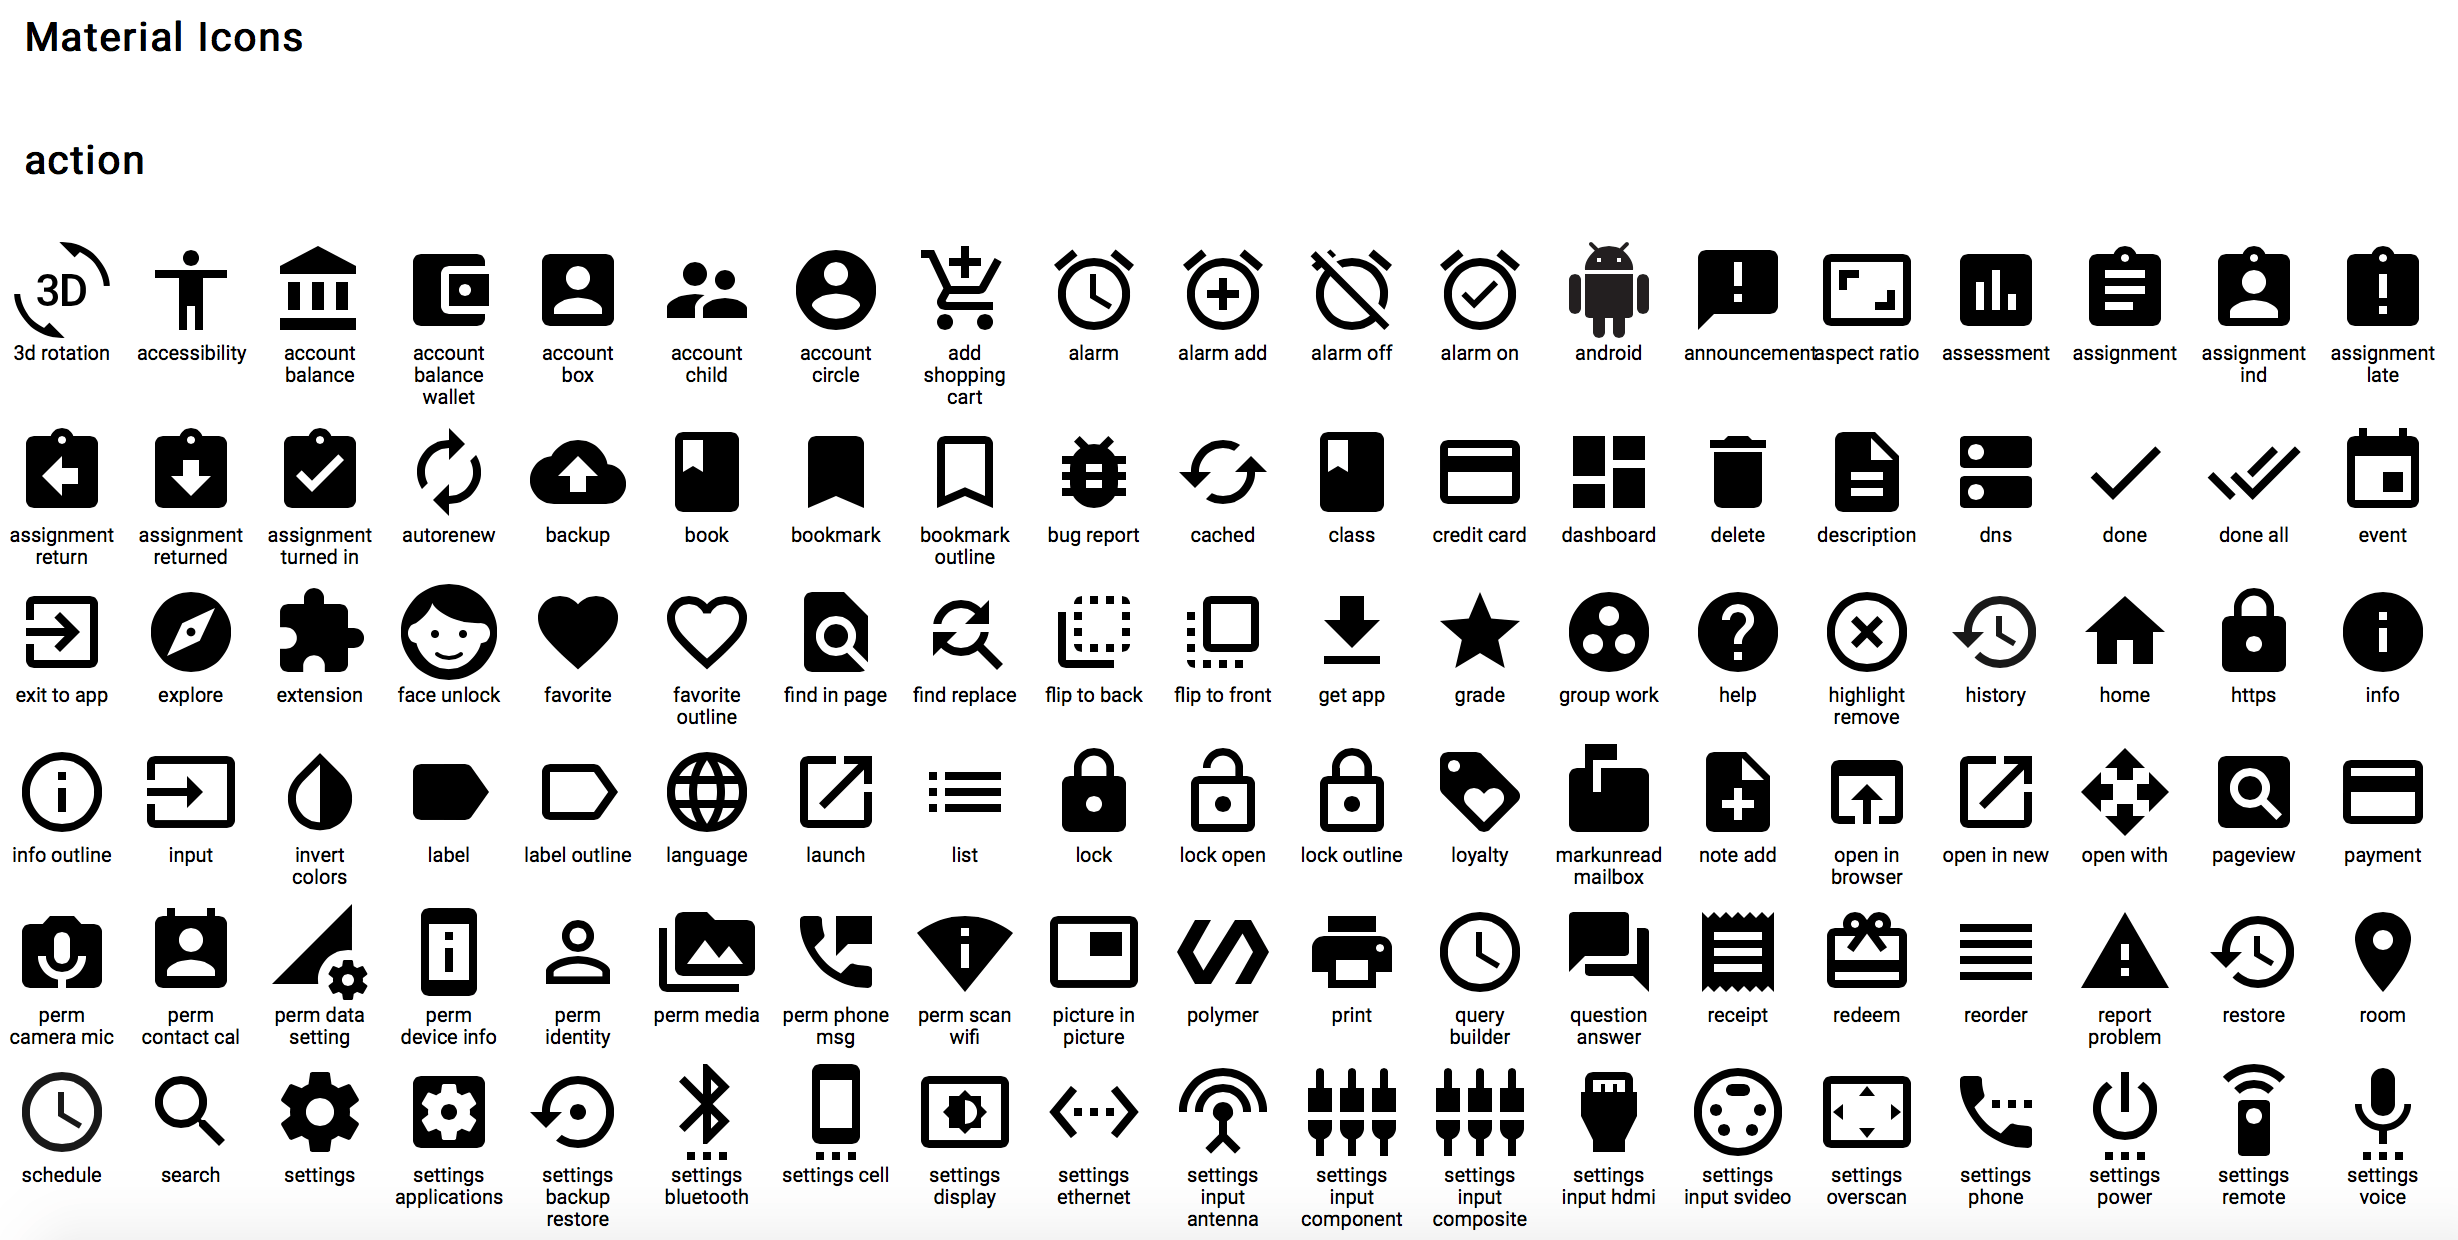 999 free business icons in vector format - The Graphic Mac